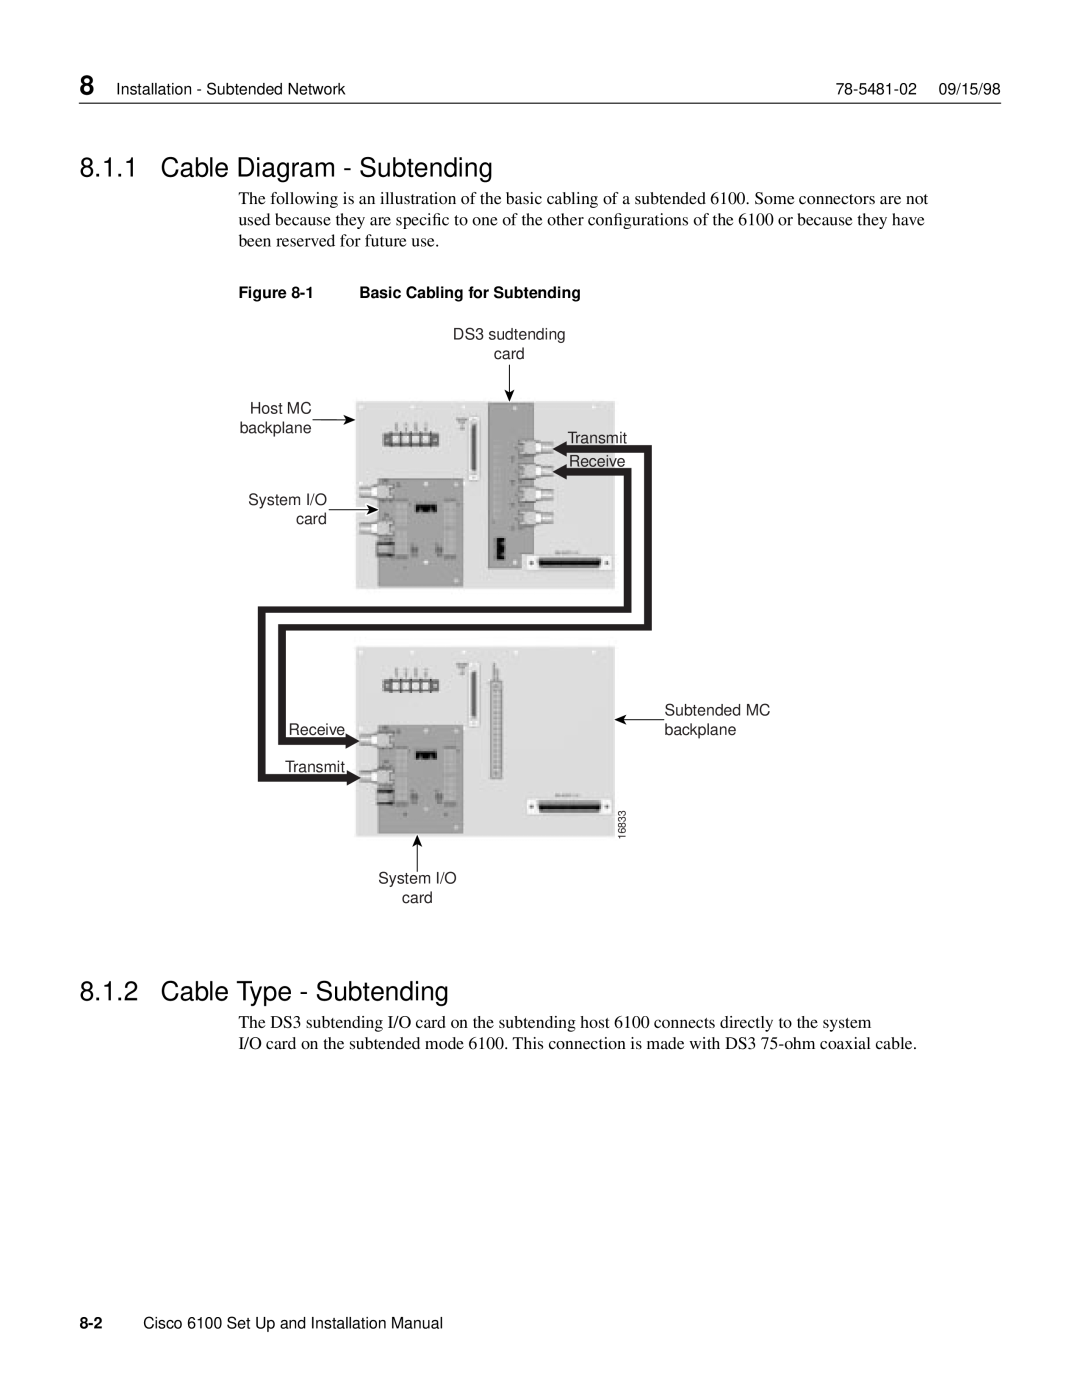 Cisco Systems 6100 installation manual Cable Diagram - Subtending, Cable Type - Subtending, 1 Basic Cabling for Subtending 